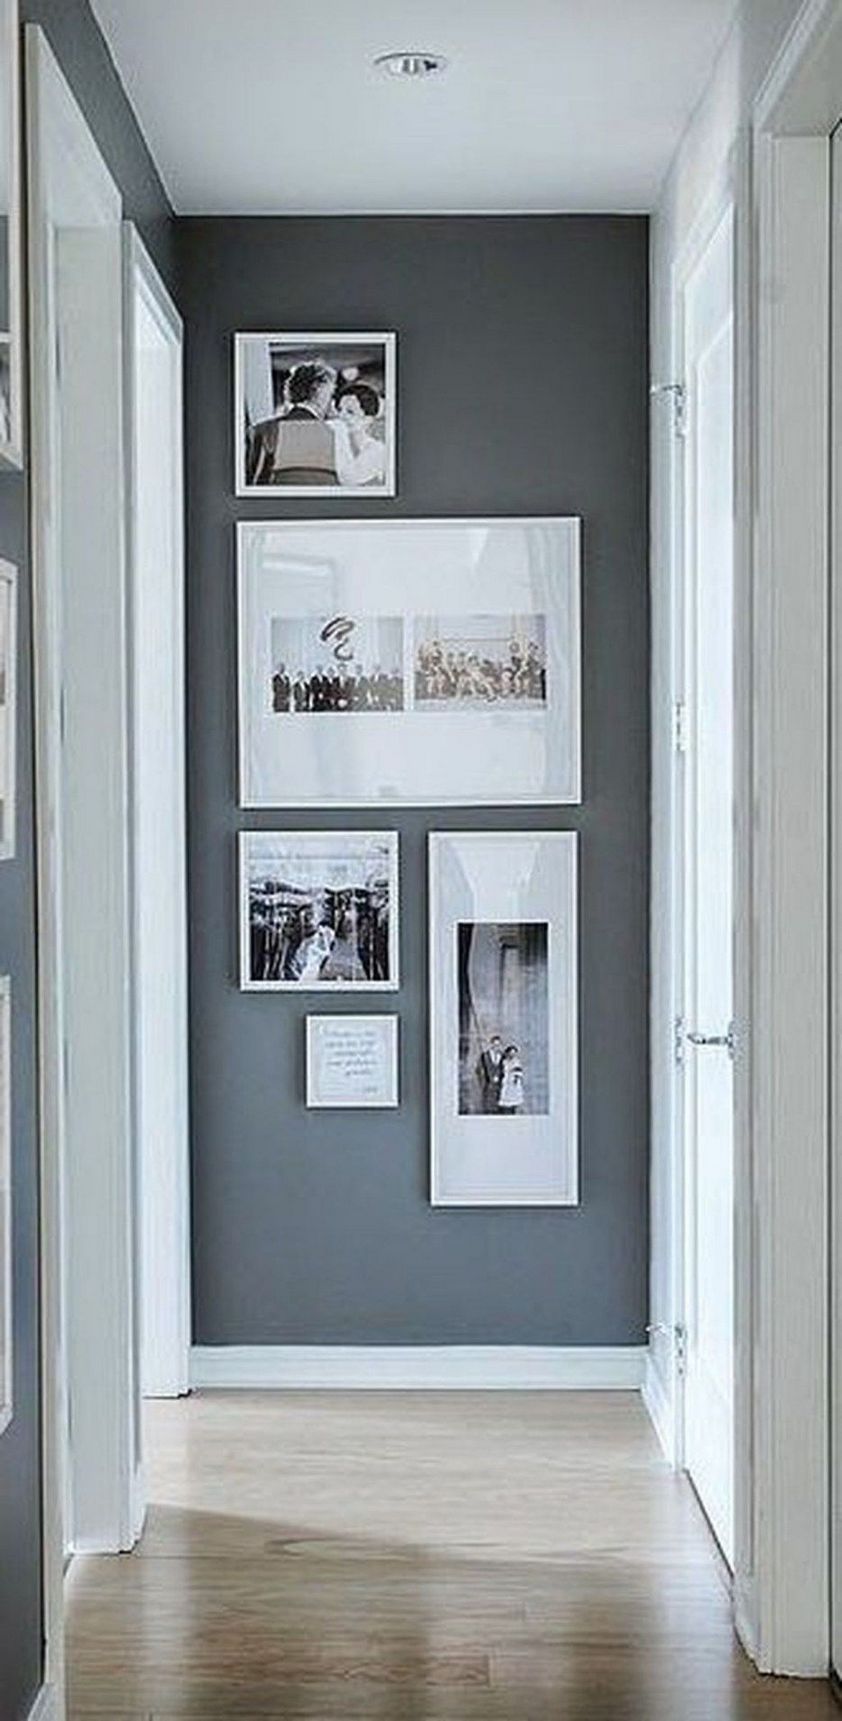 Gallery wall decor ideas to show sweet memory 30 - Savvy Ways About Things Can Teach Us